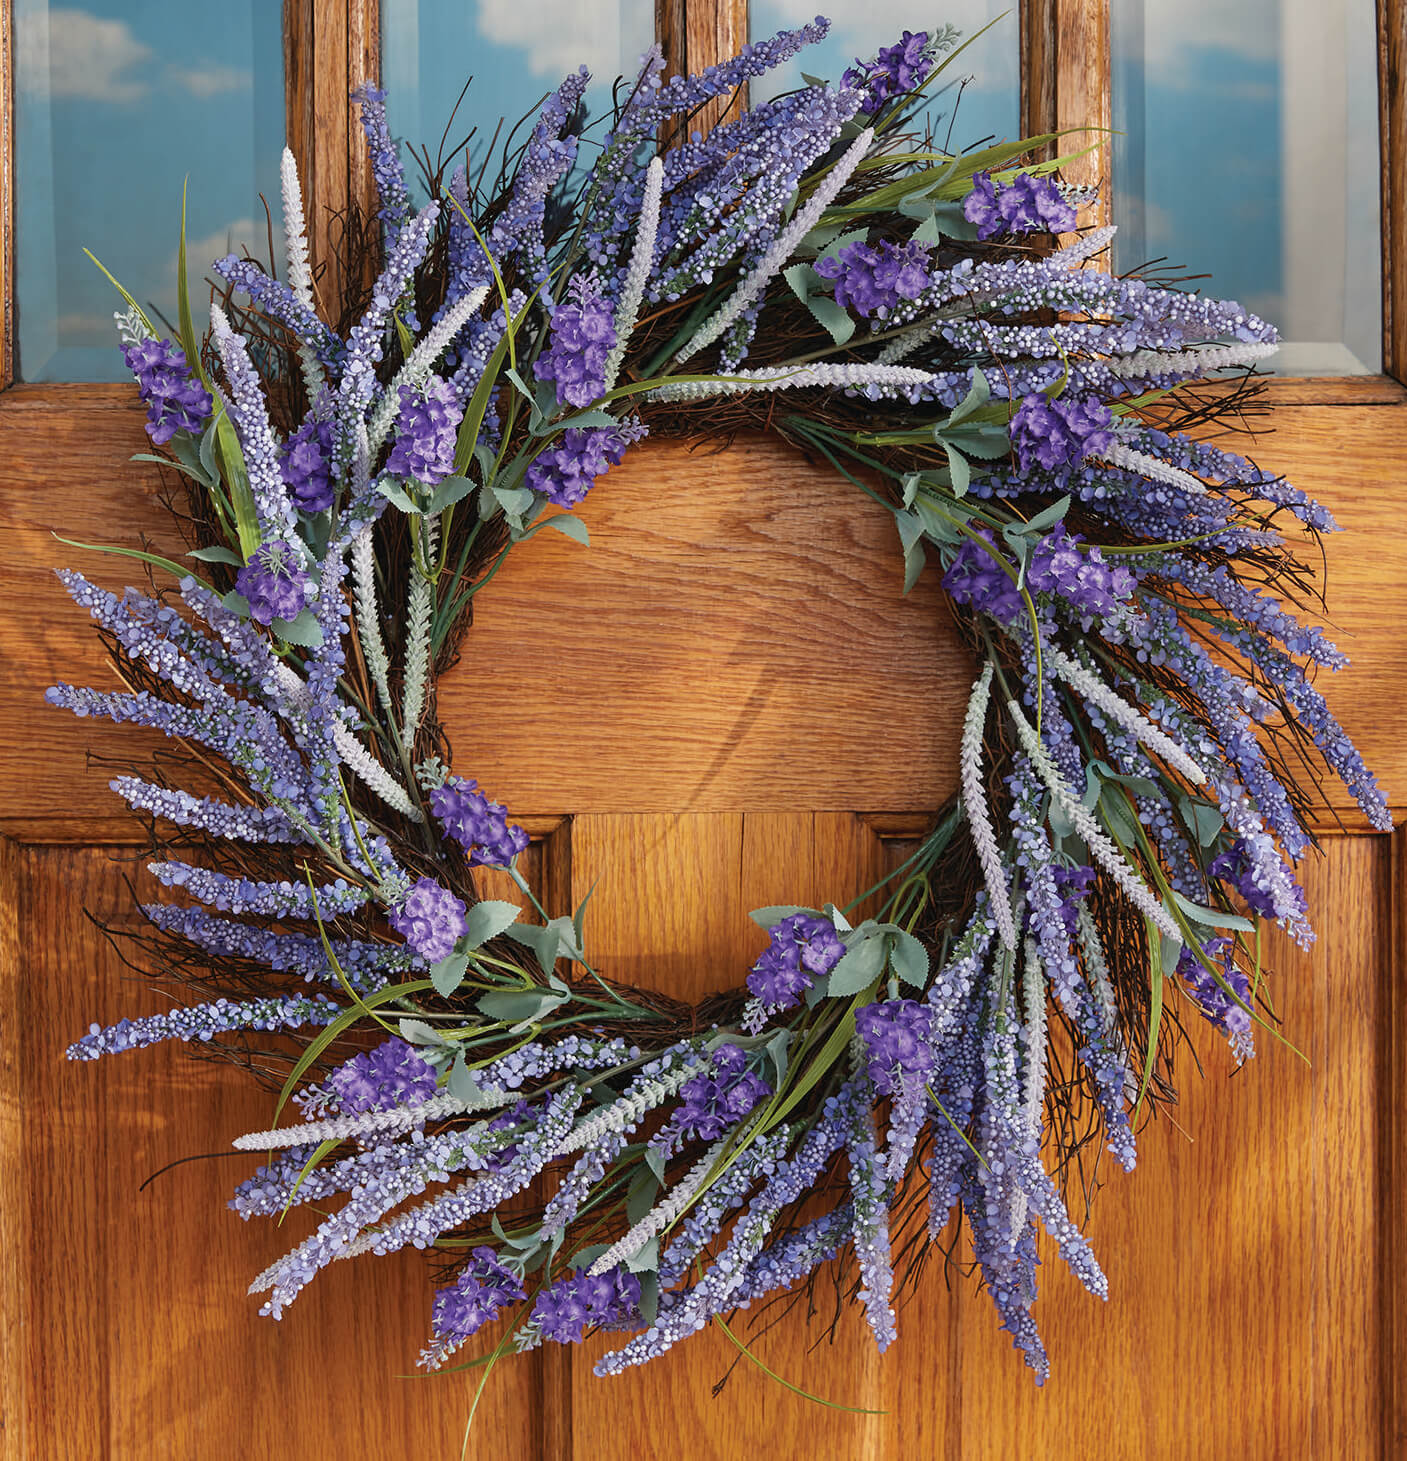 A full, round floral twig wreath of lavender hung on an oak door with paned windows.